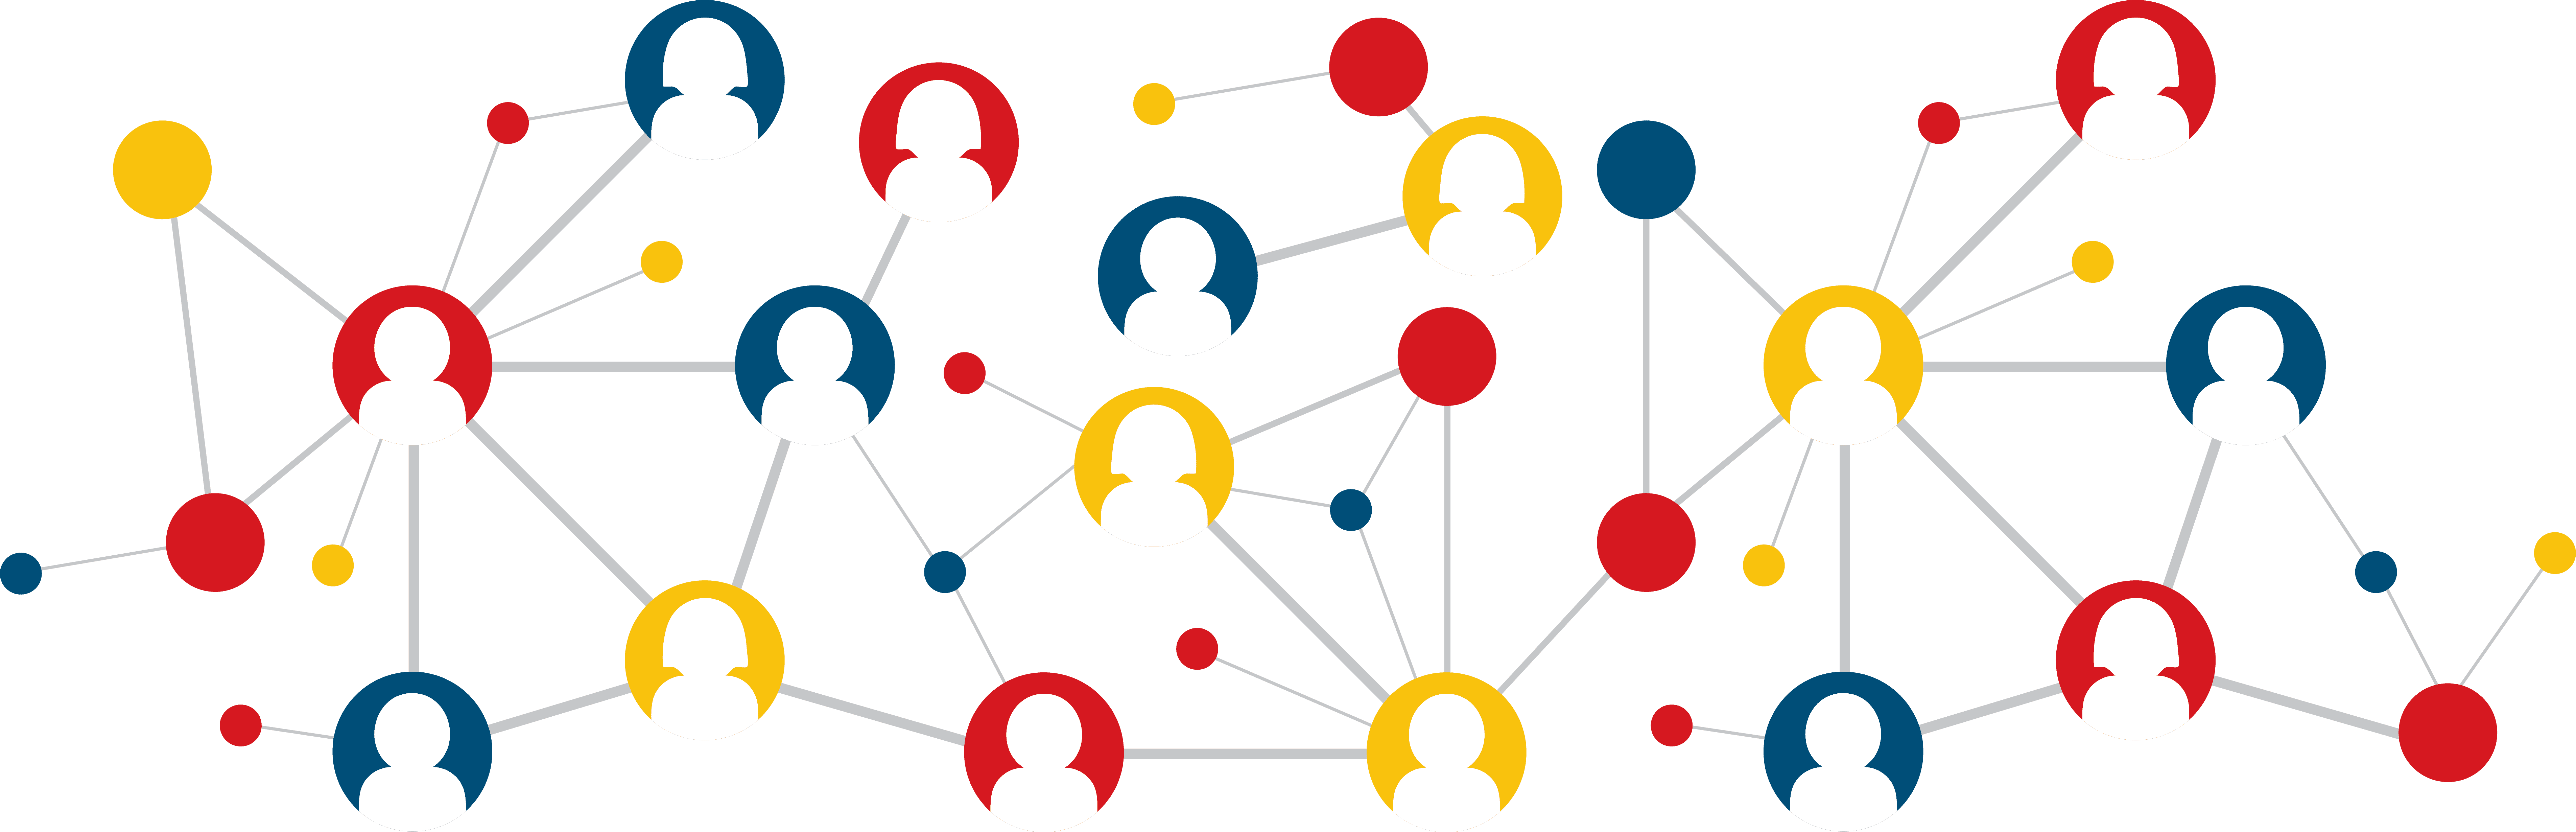 Social Network Connections Graphic